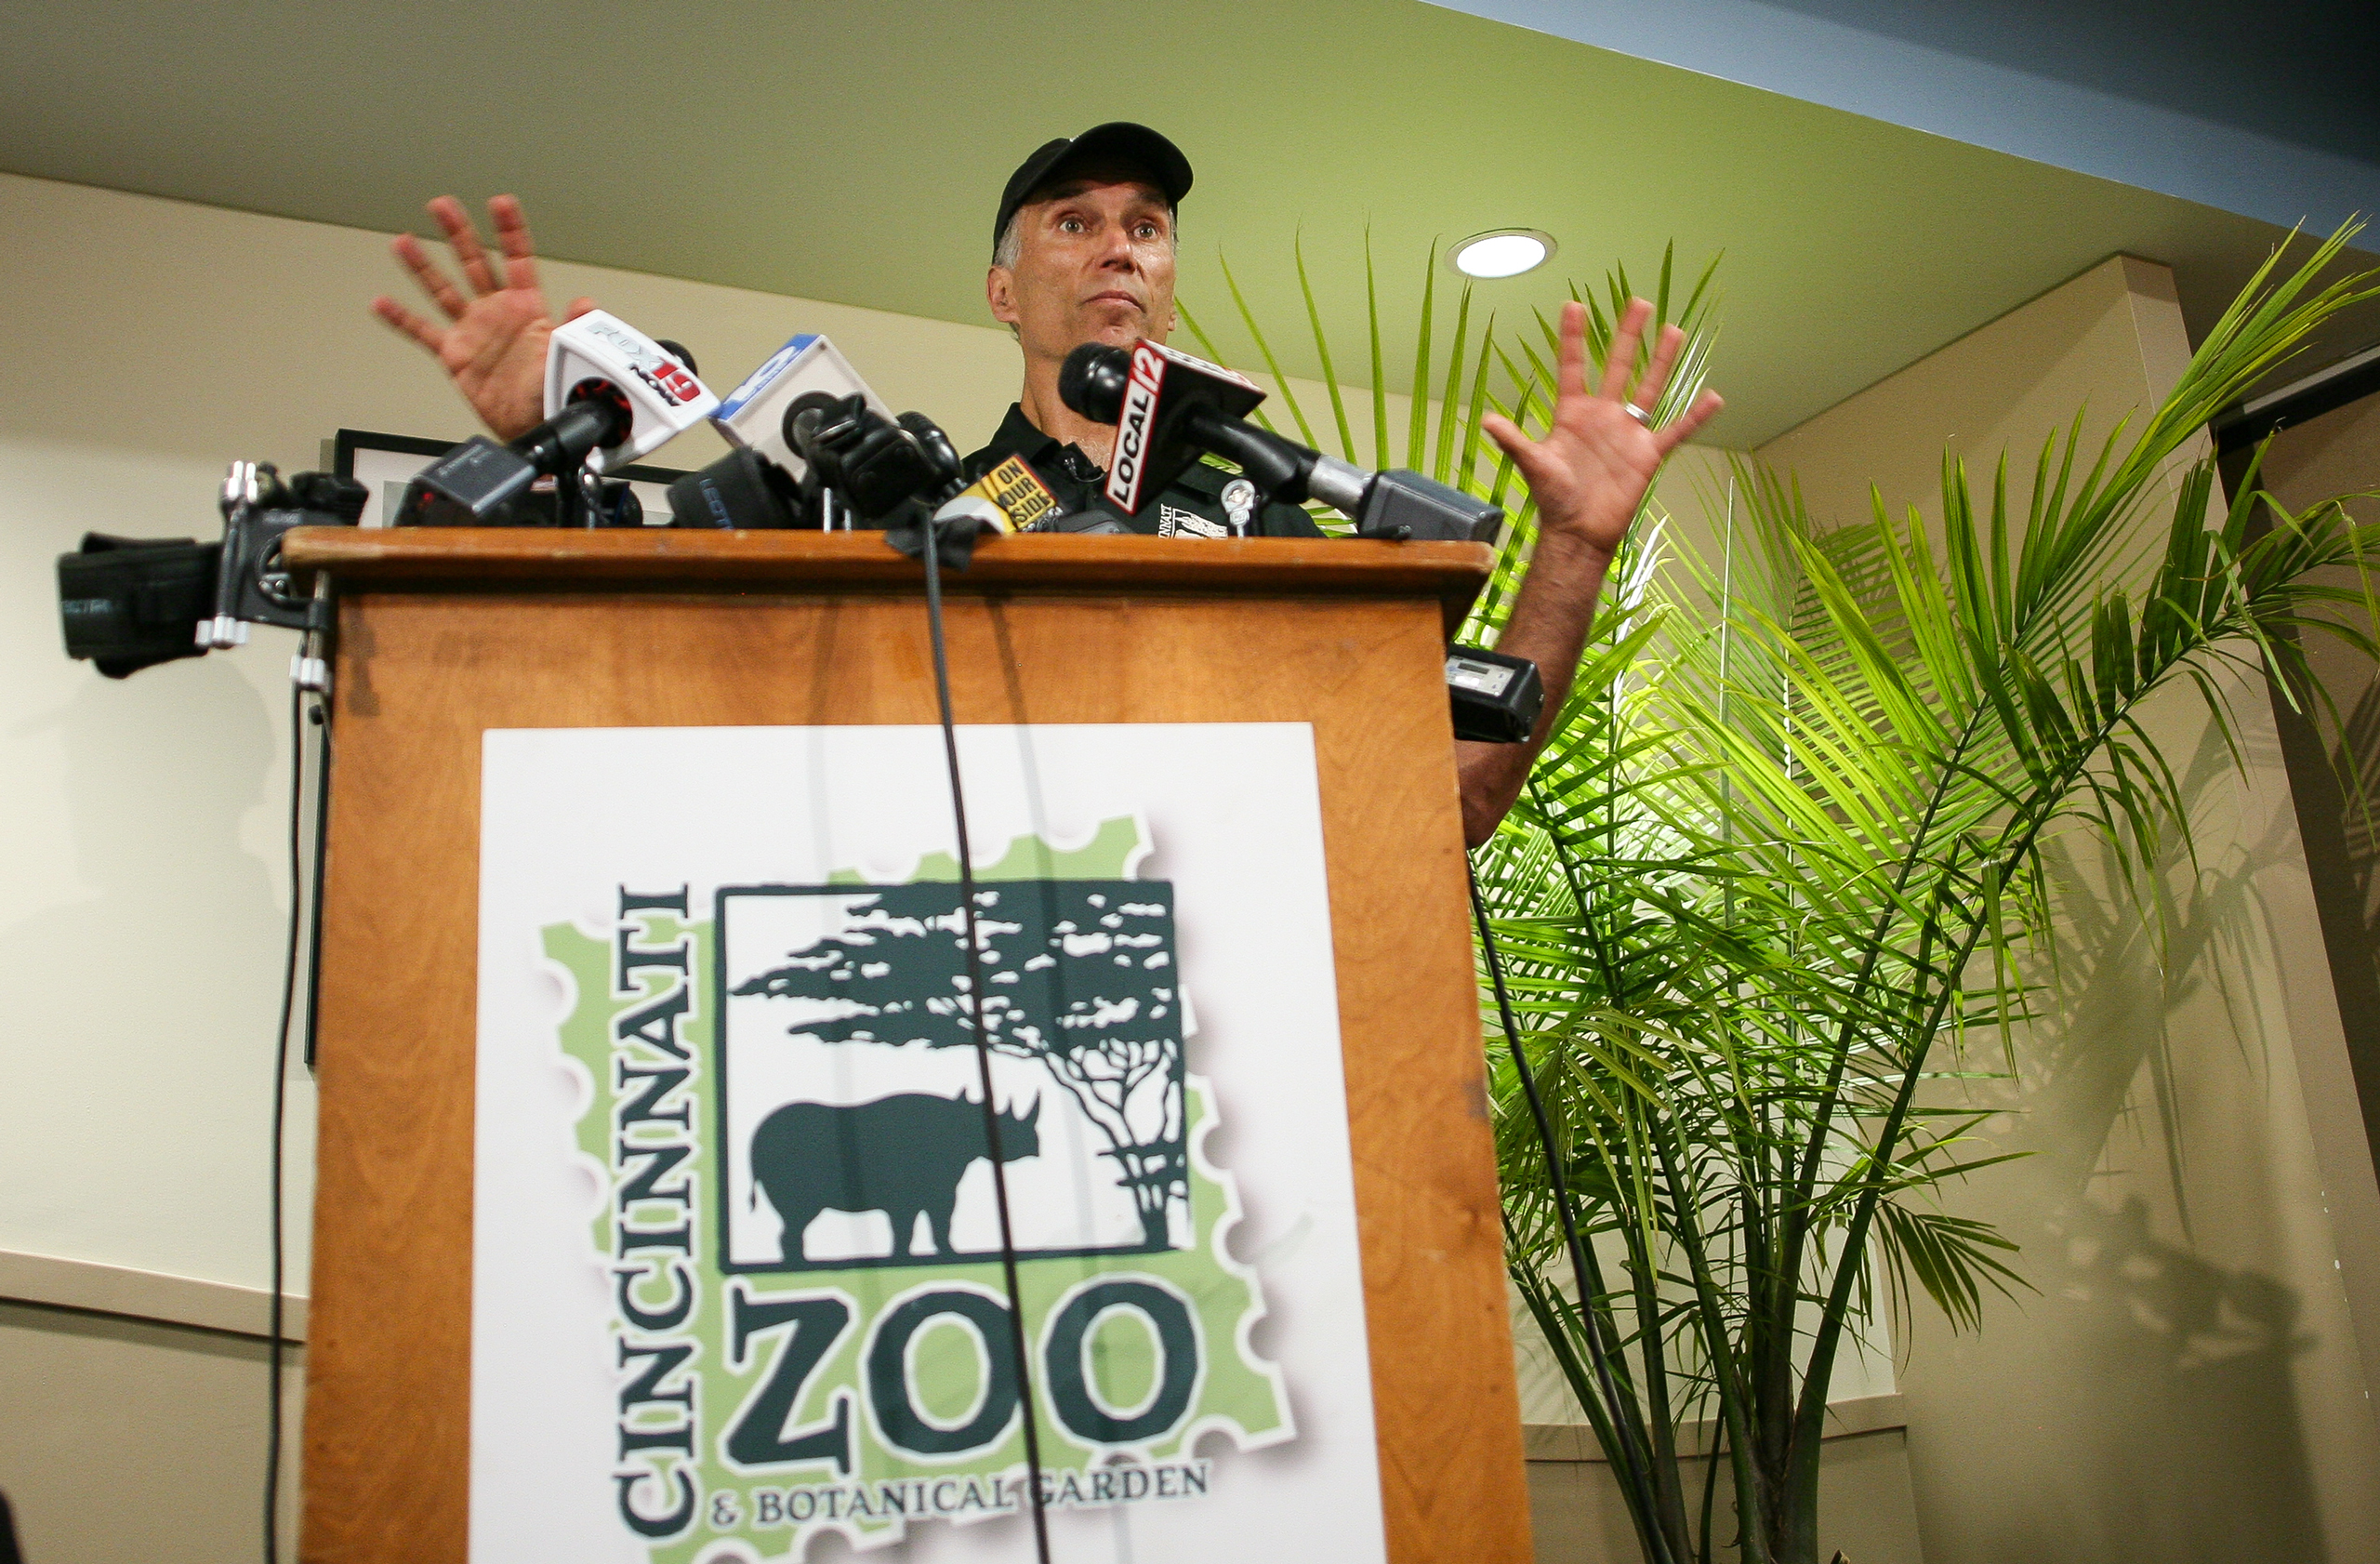 Thane Maynard, Executive Director of the Cincinnati Zoo and Botanical Gardens, speaks to reporters two days after a boy tumbled into a moat and officials were forced to kill Harambe, a Western lowland gorilla, in Cincinnati, Oh., on May 30, 2016. (William Philpott—Reuters)